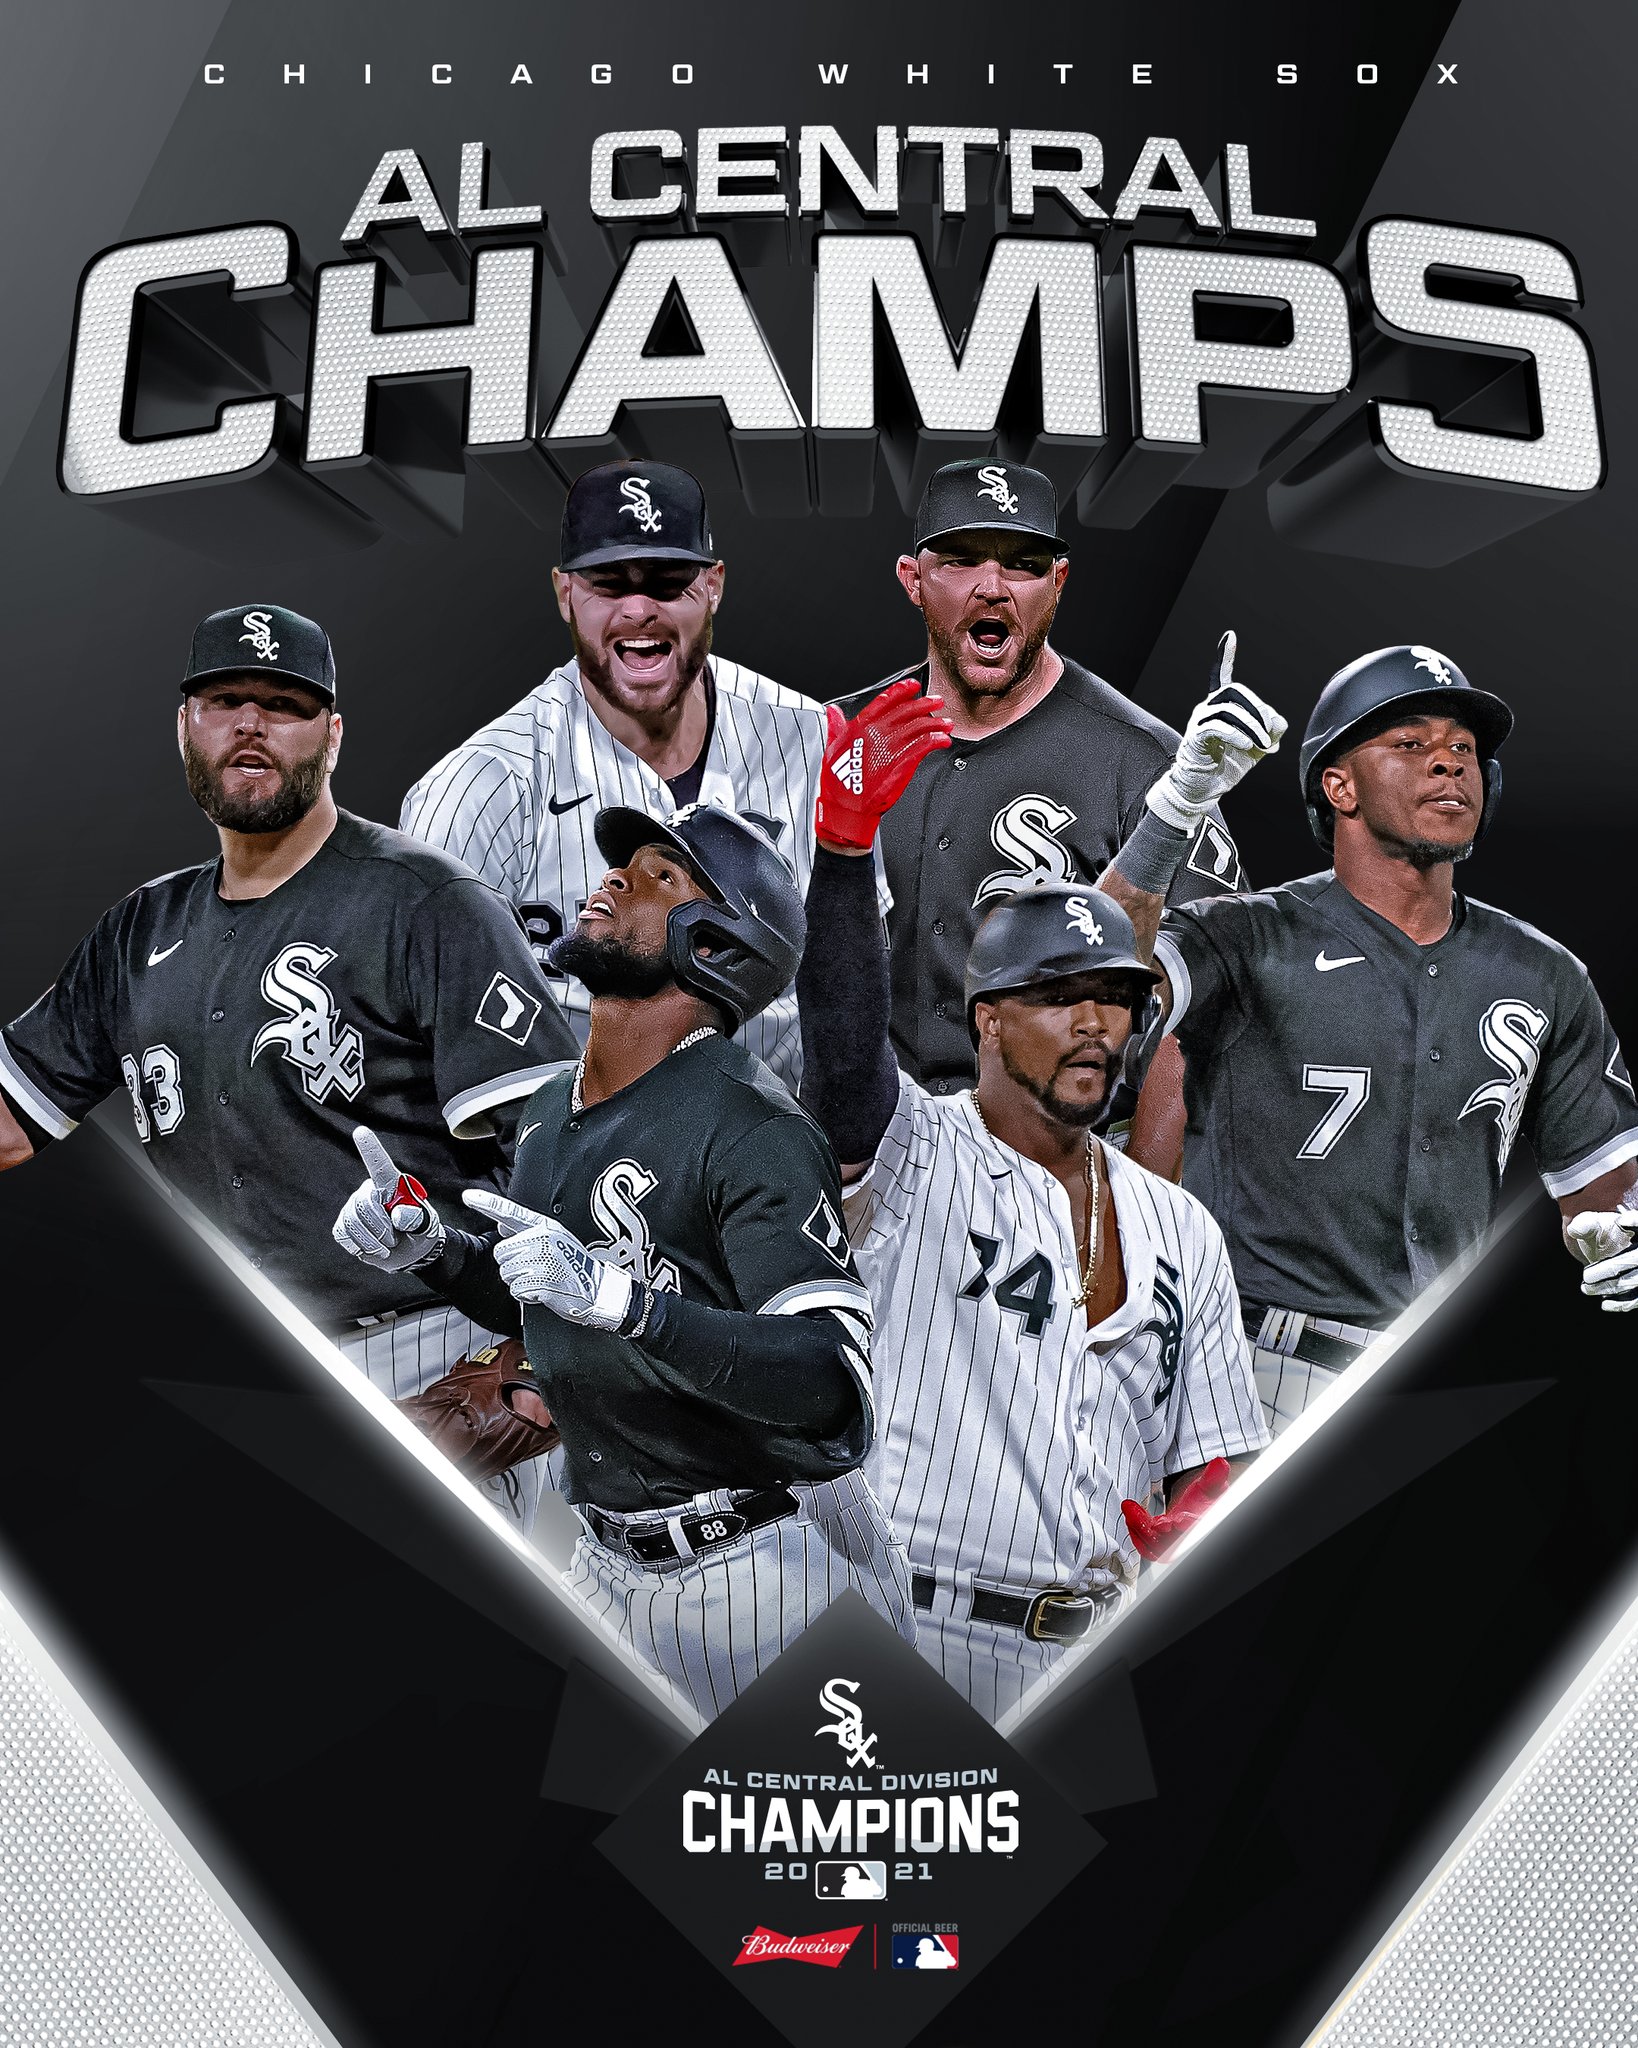 2000 White Sox Highlight Video AL Central Champions 